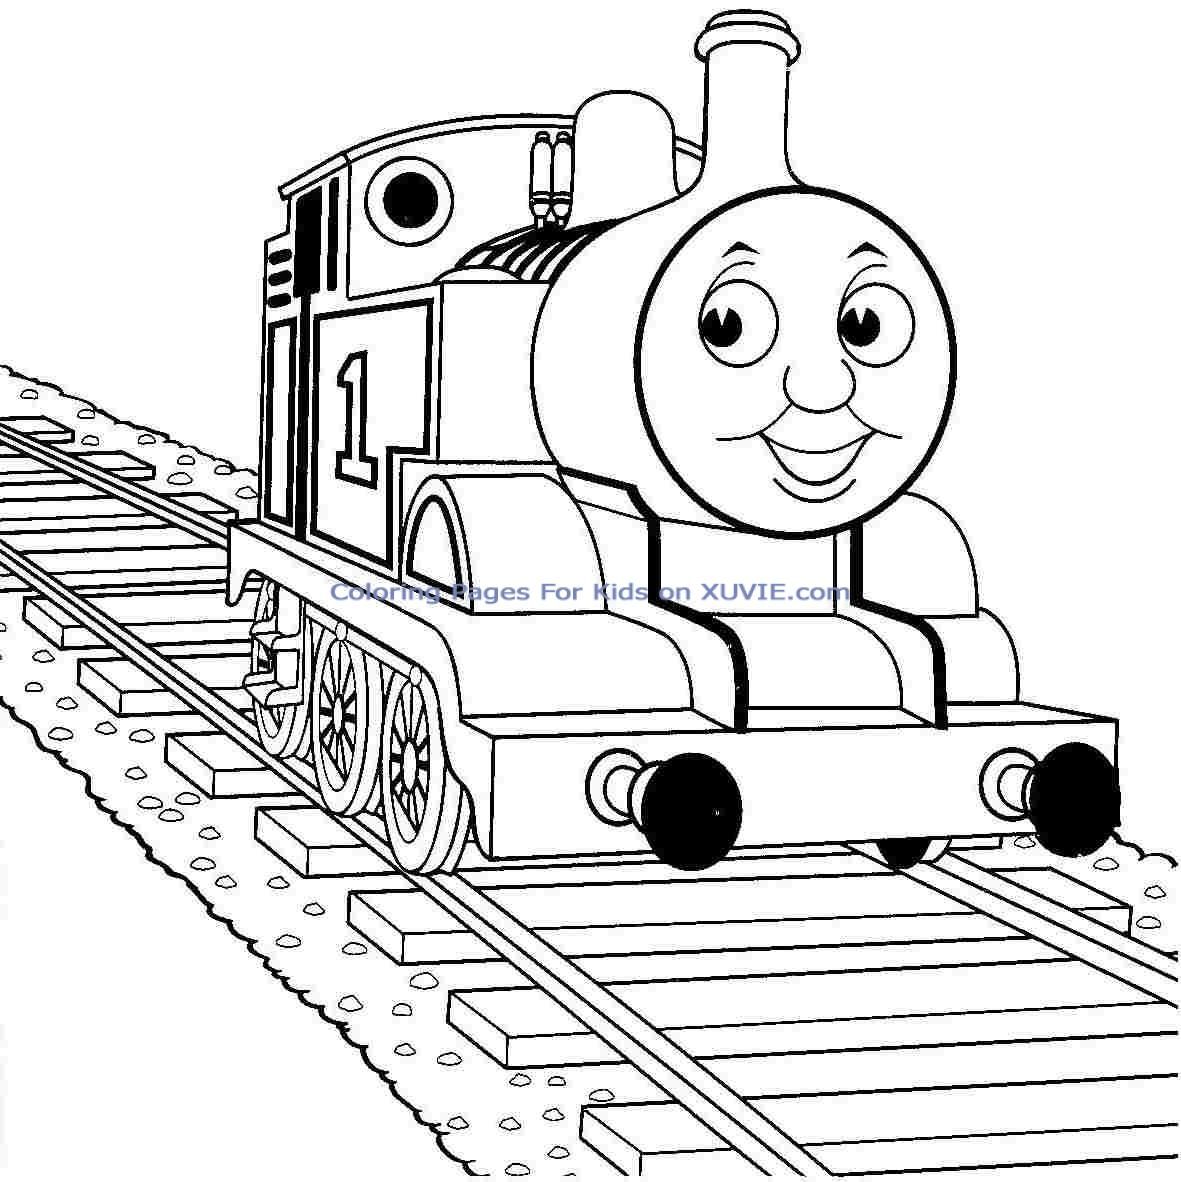 colouring-pages-of-thomas-the-tank-engine-clip-art-library